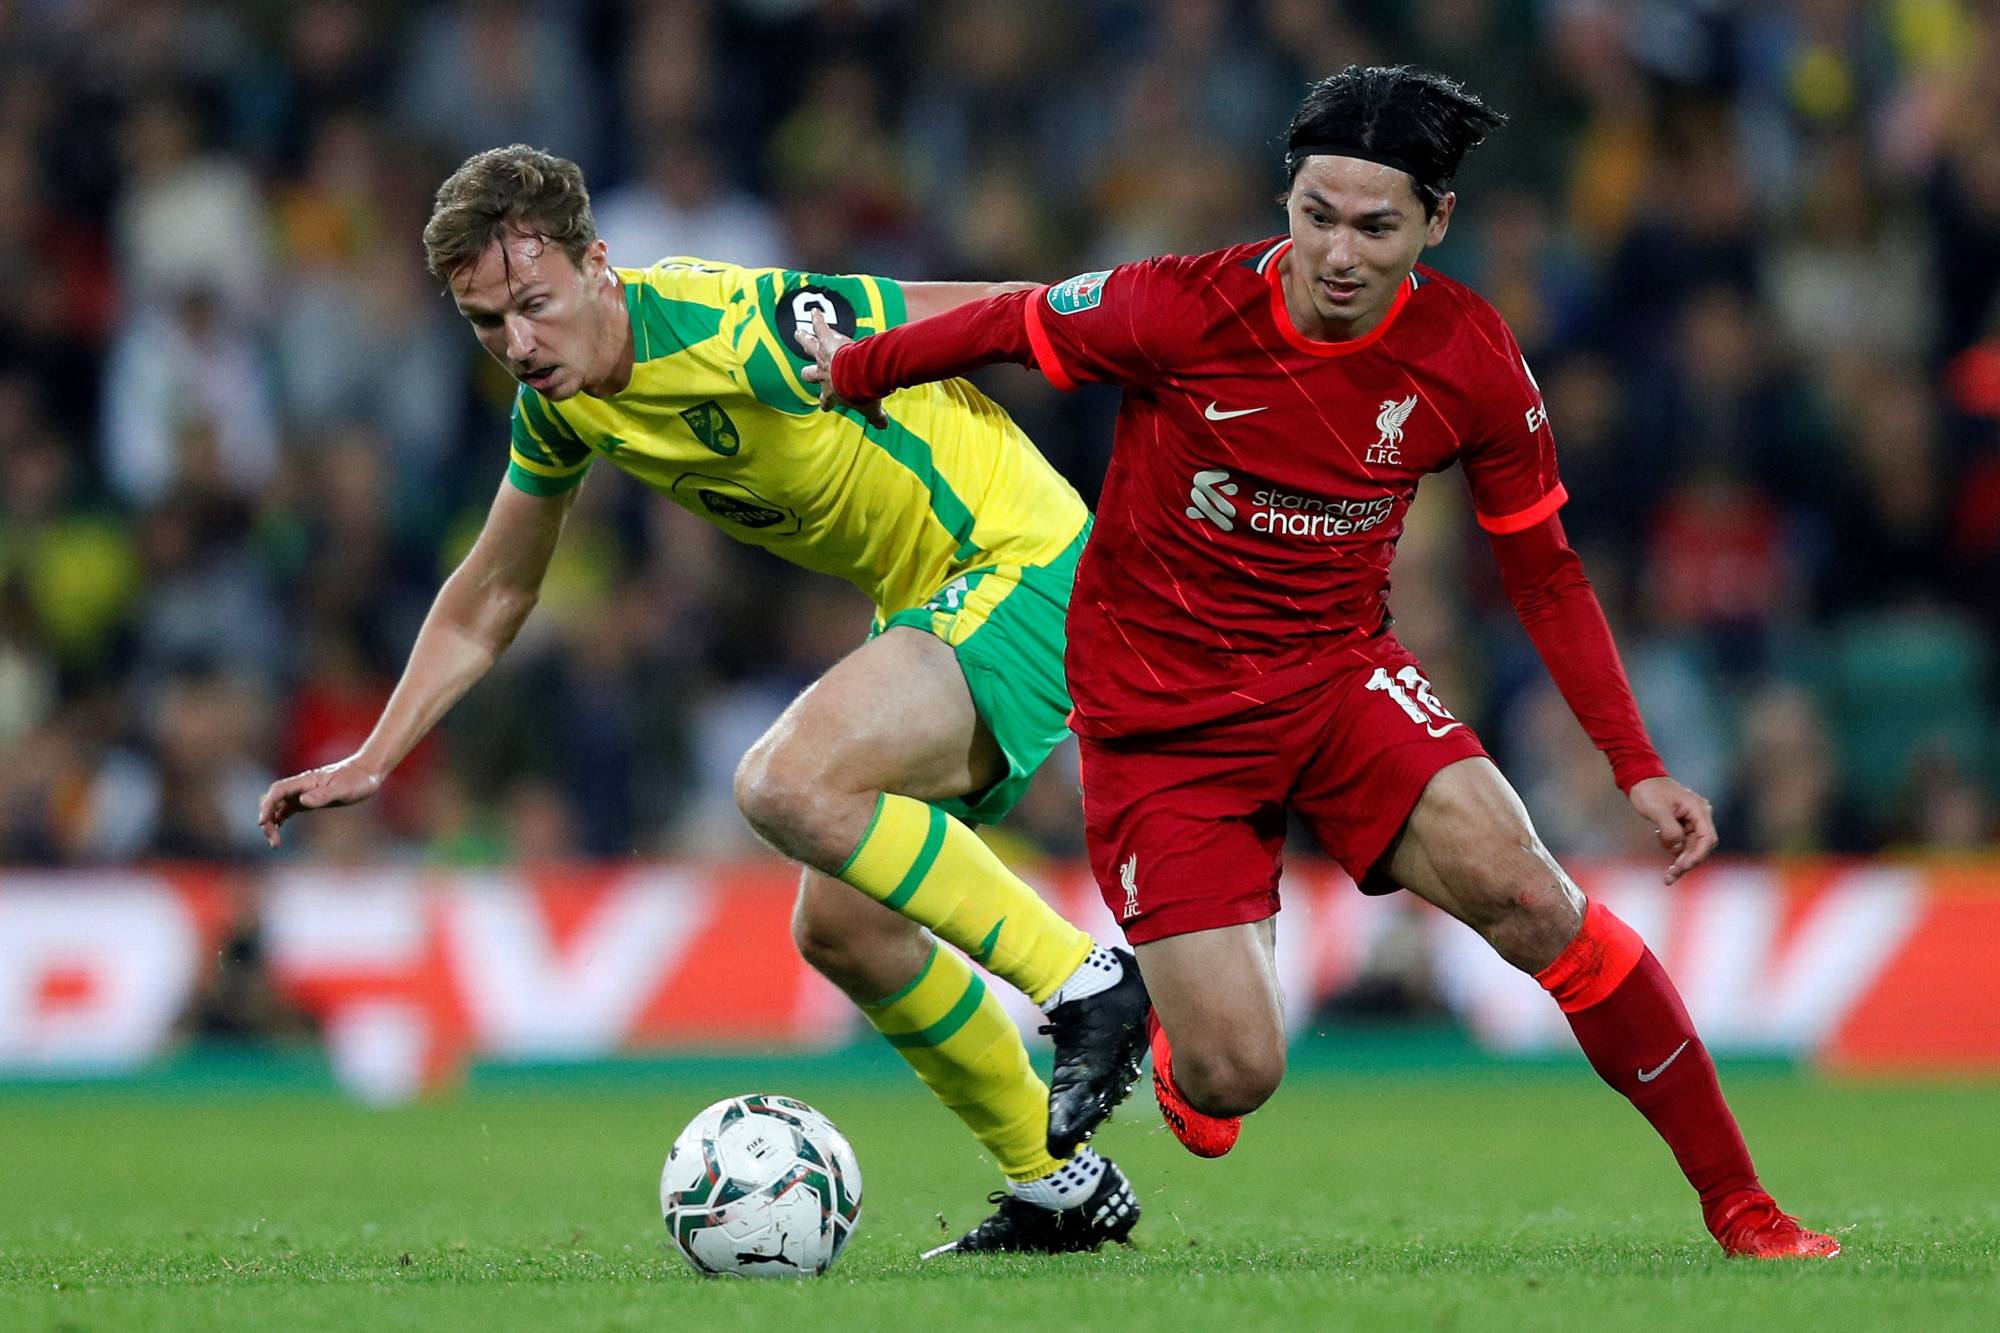 Takumi Minamino nets brace for Liverpool in cup win over Norwich